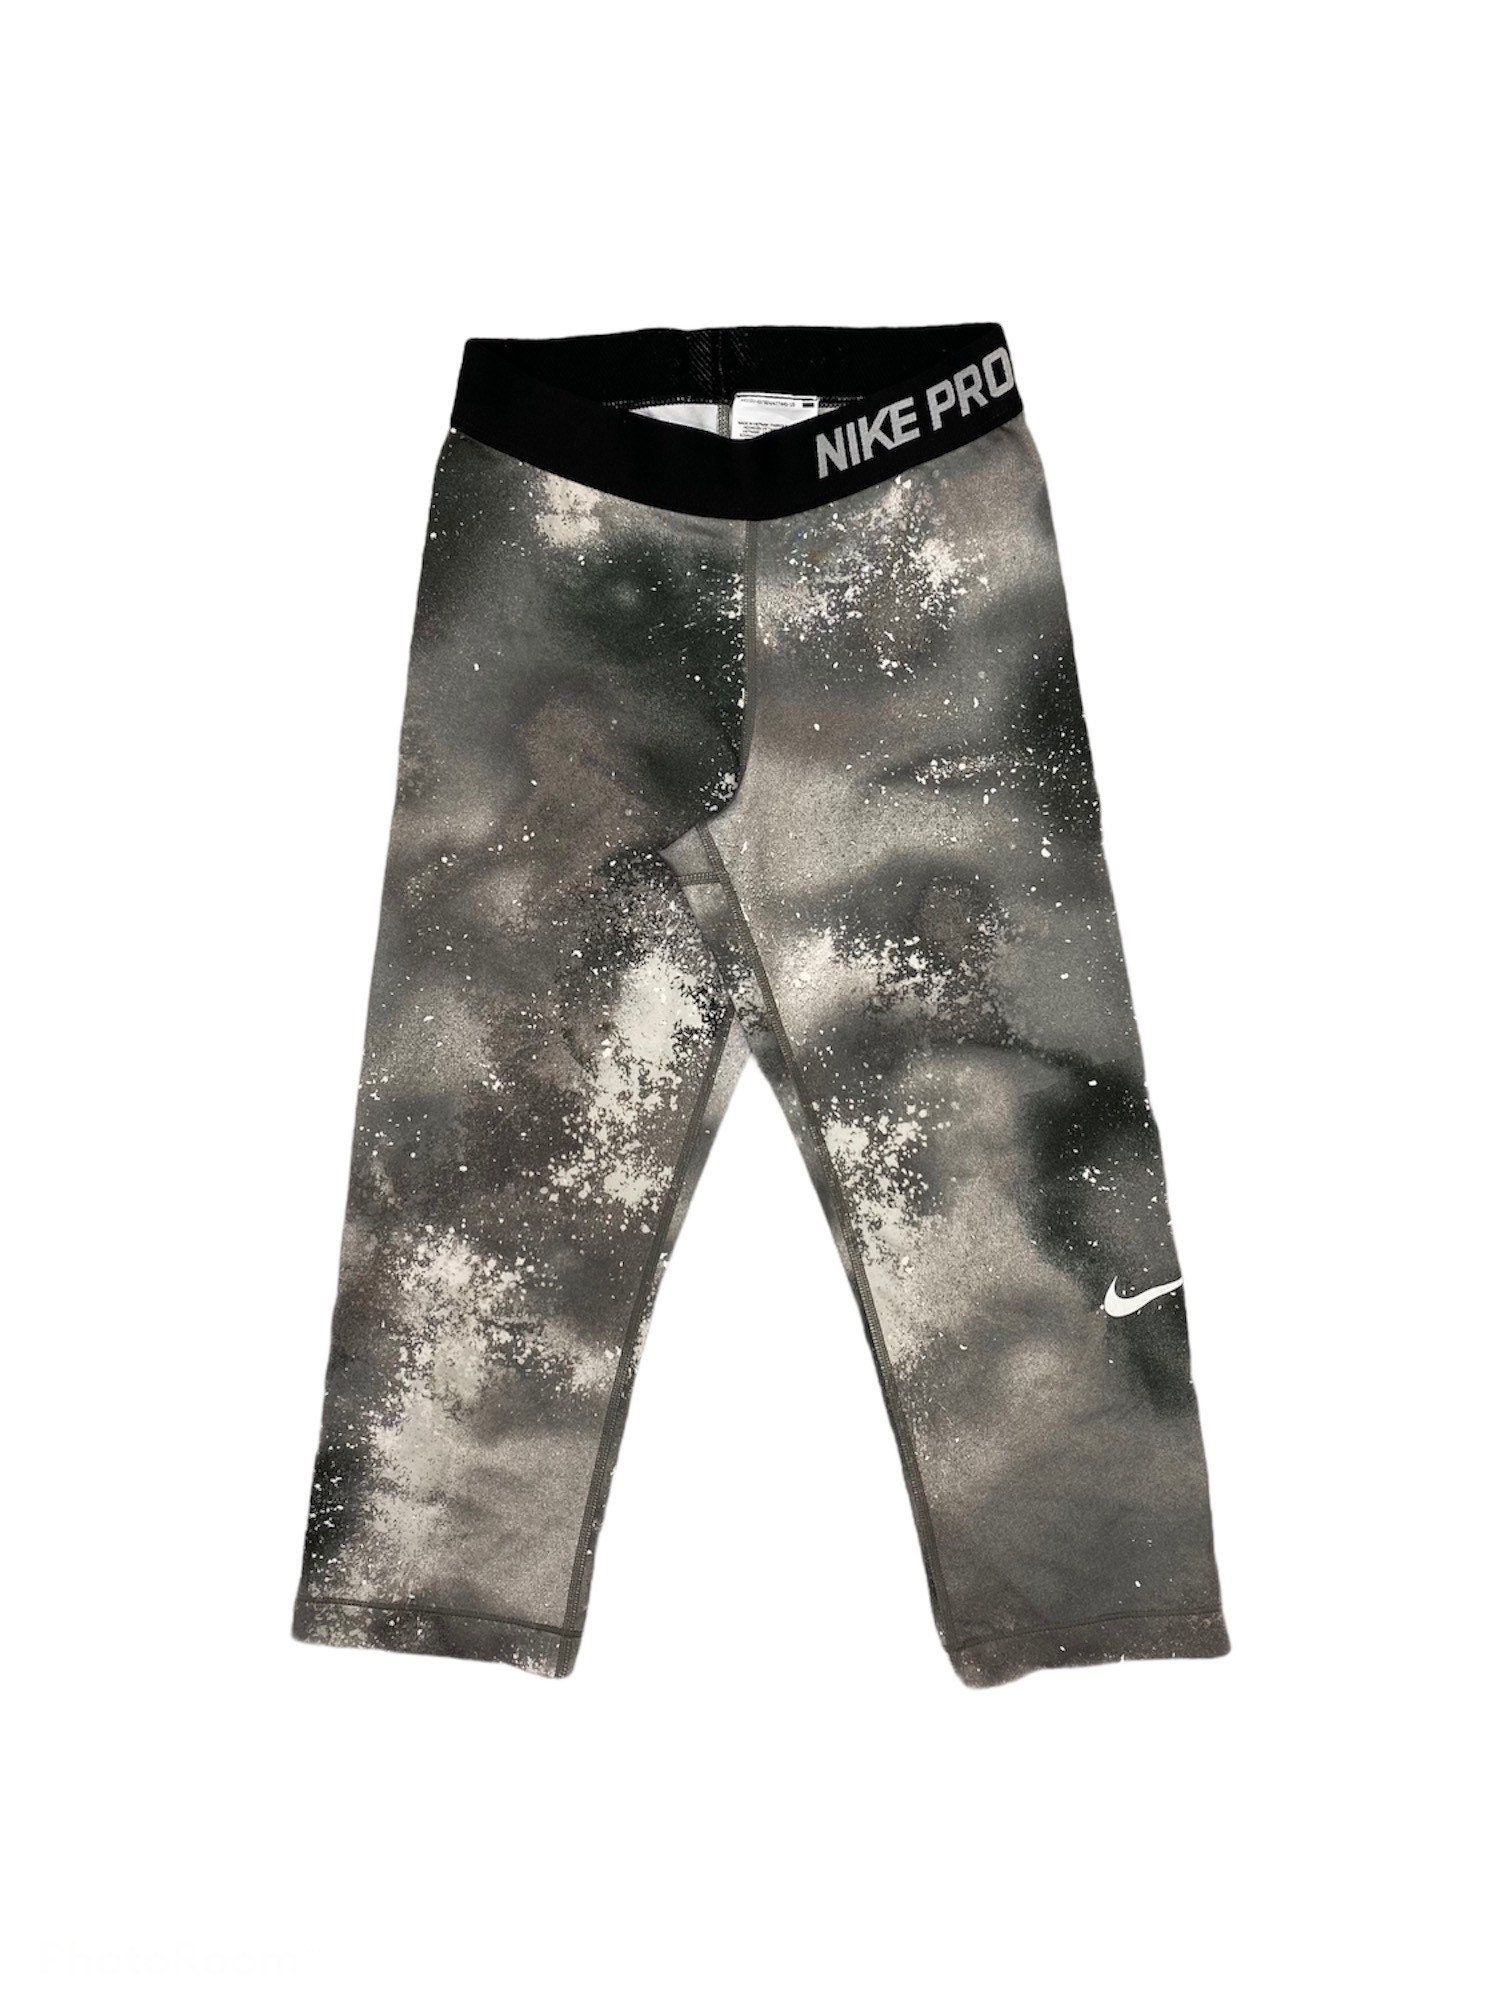 Womens Cropped Nike Pro Leggings With White Galaxy - Etsy